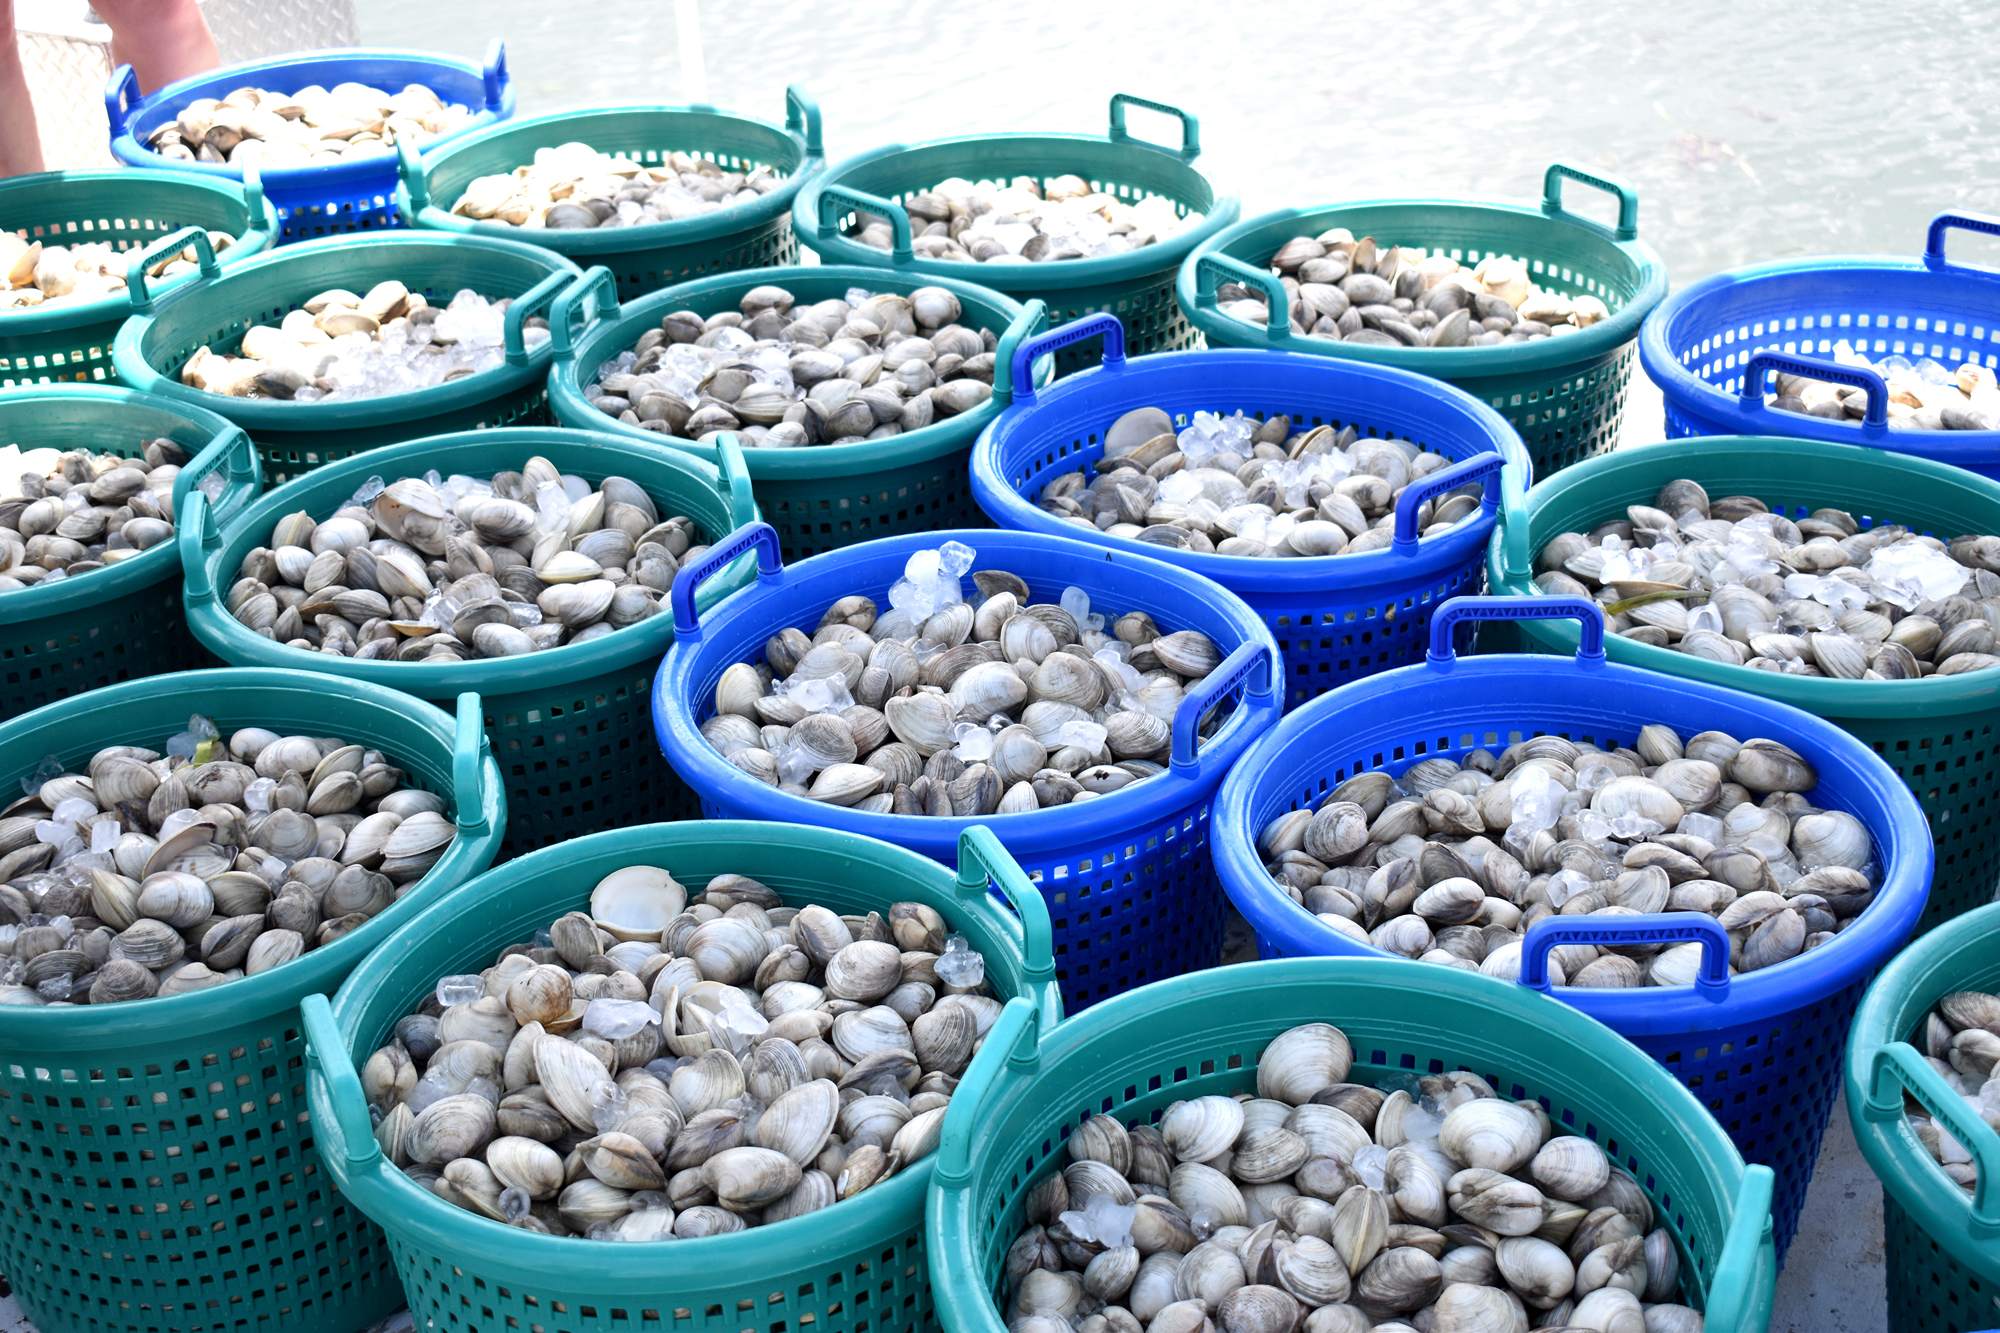 Sarasota Bay Watch and volunteers released 30,000 clams into the Bay on June 16.